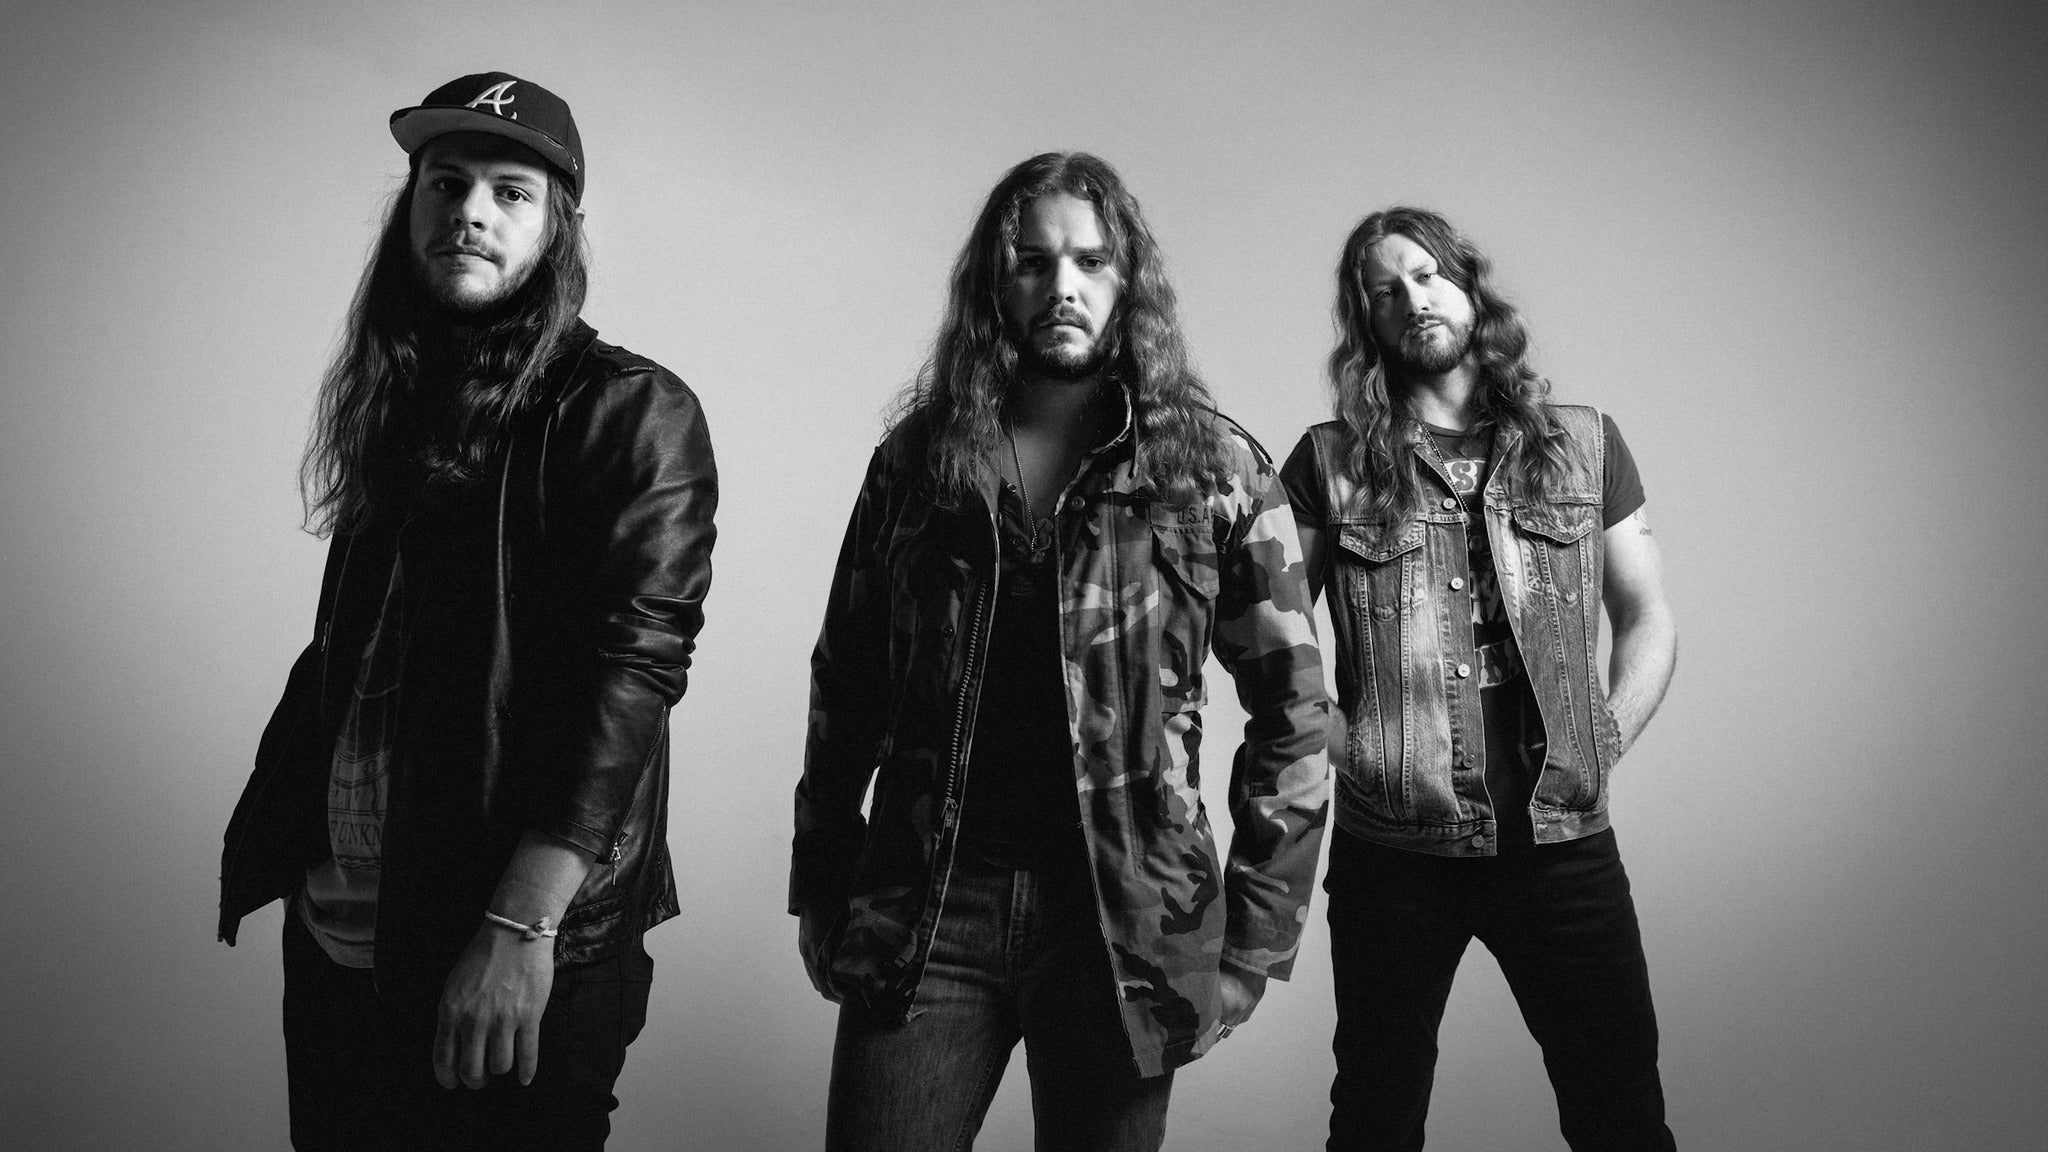 SiriusXM Outlaw Country & Ones to Watch Present Whiskey Myers in Silver Spring promo photo for Citi® Cardmember Preferred presale offer code